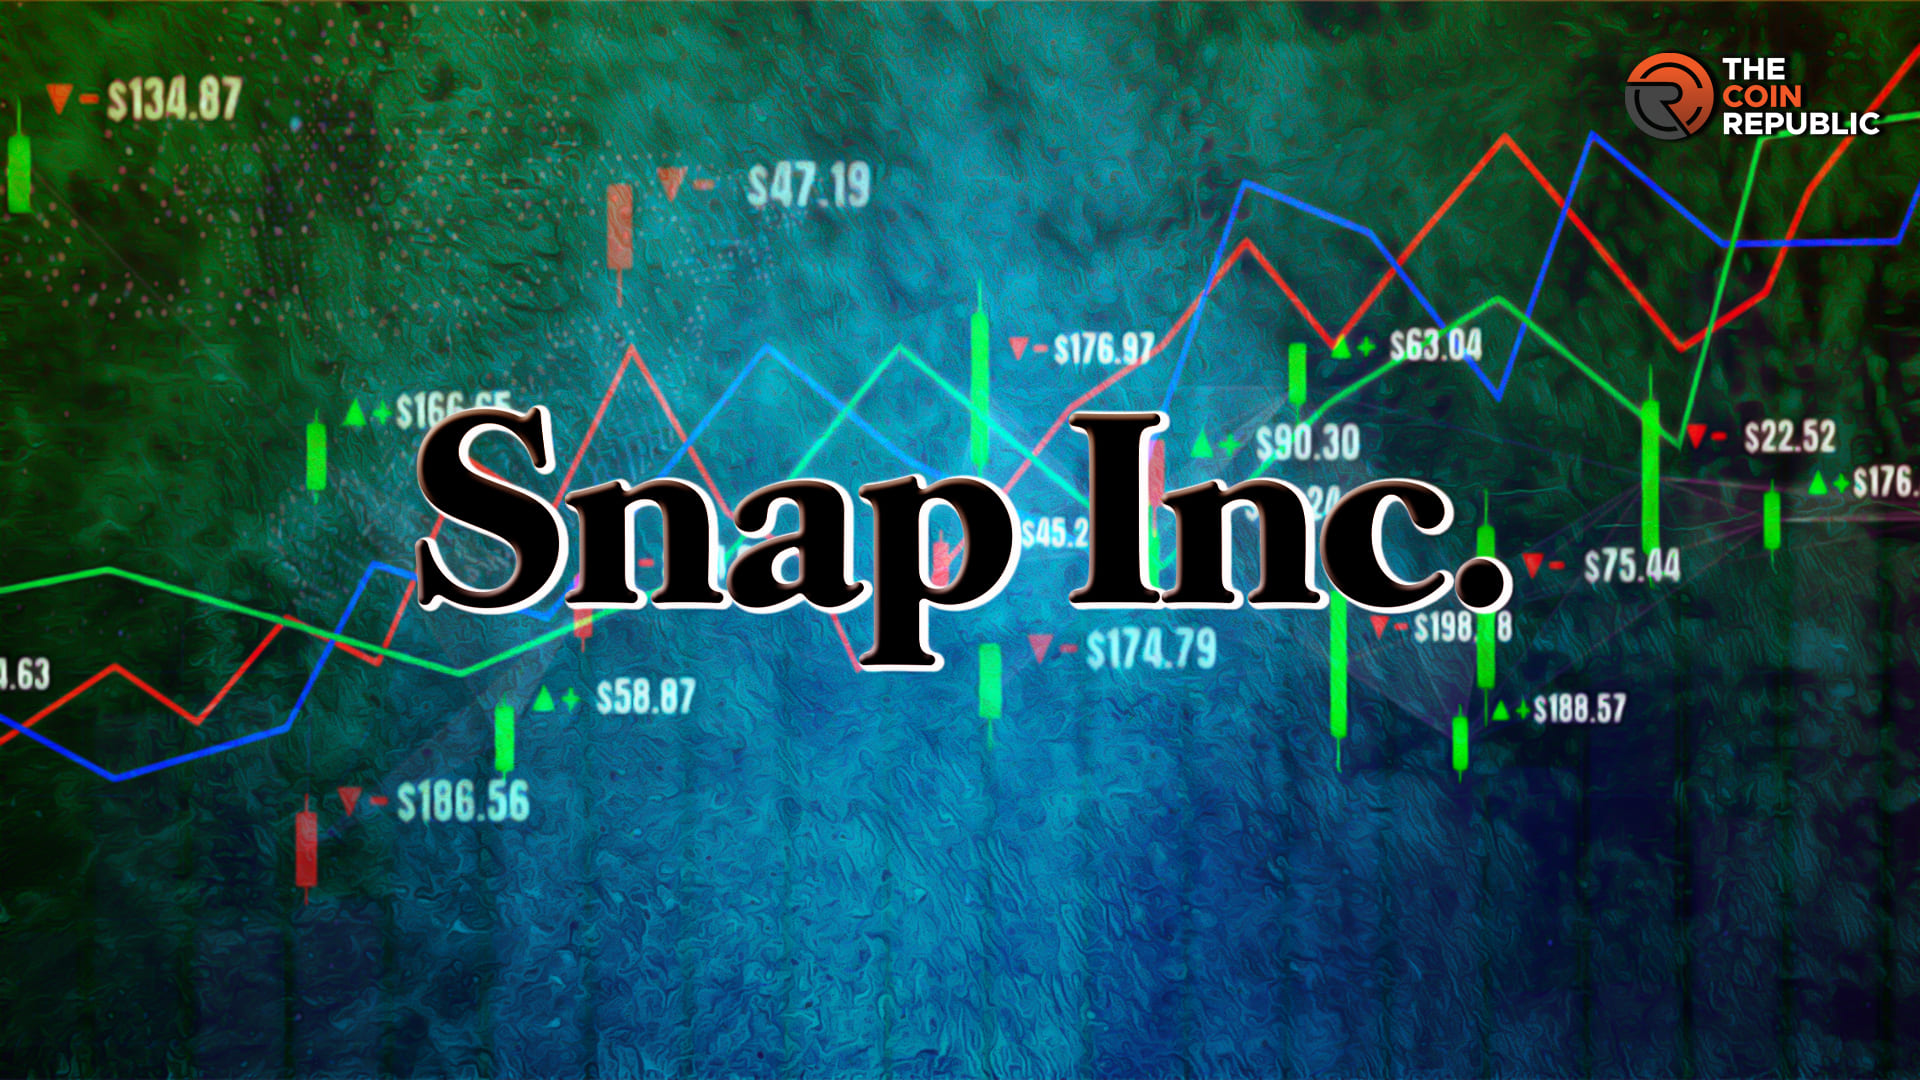 Snap Inc.: Will SNAP Stock Price Rise From Ashes to Reach $13.65?